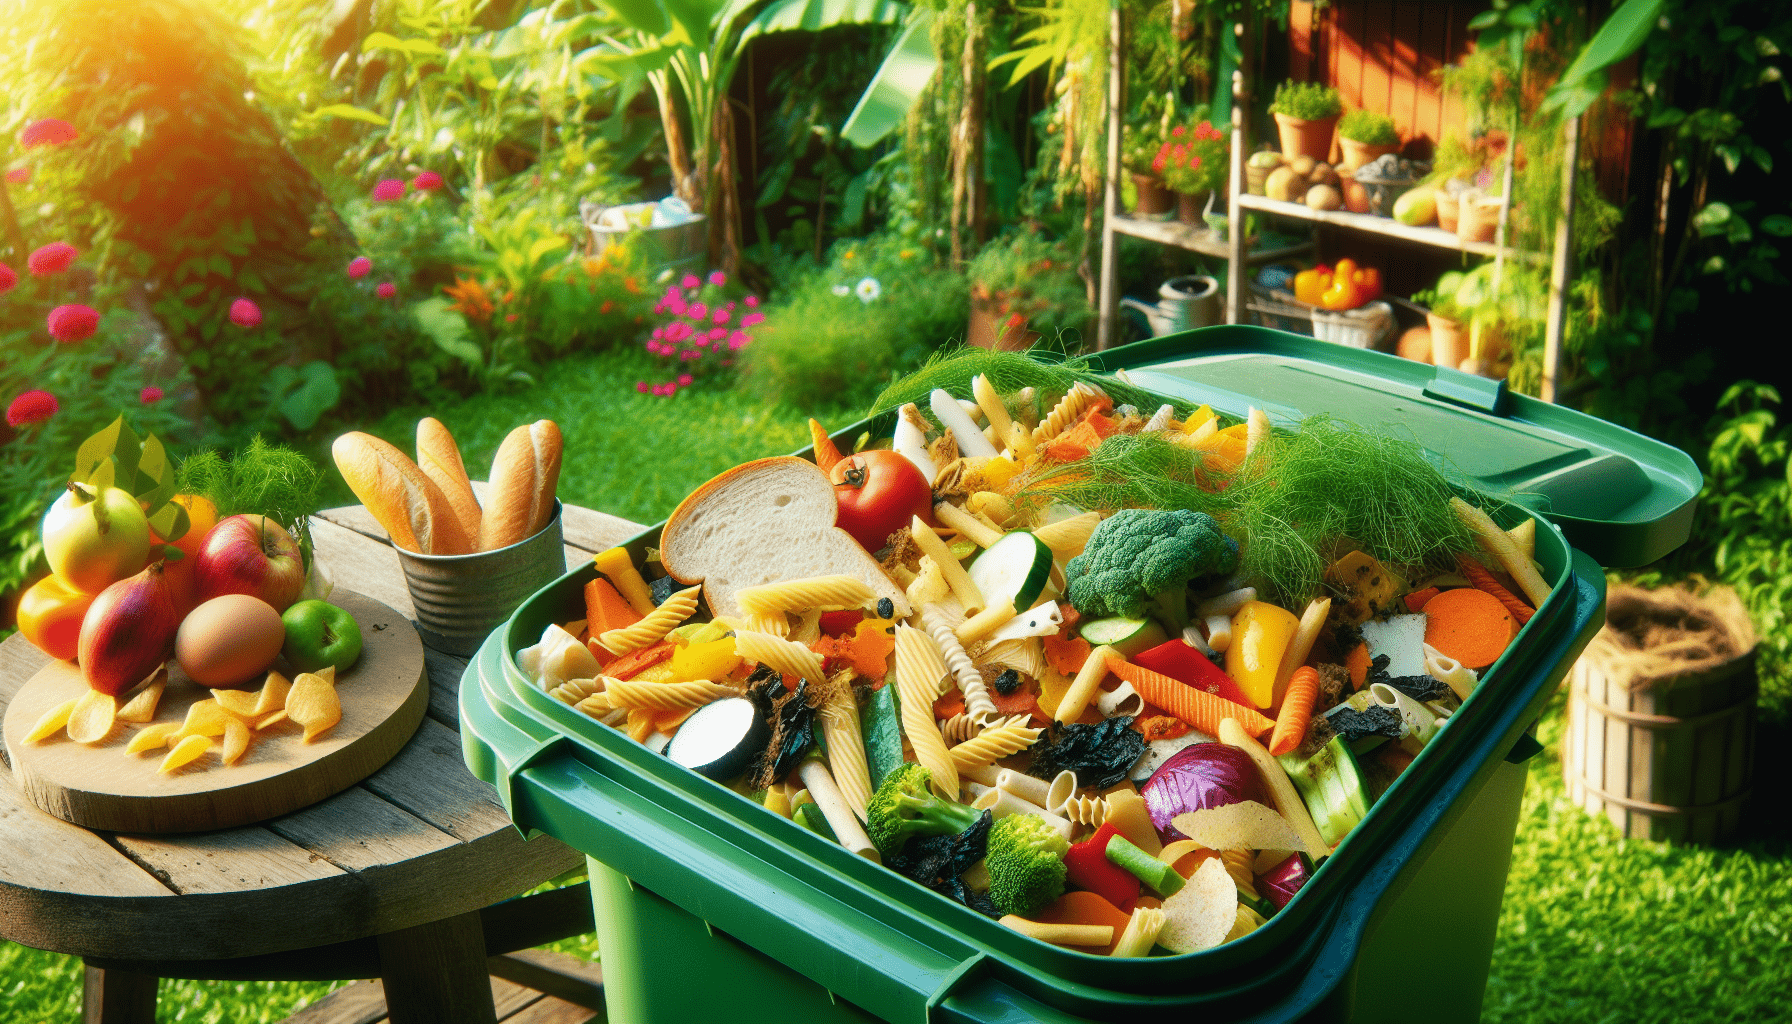 Can I Compost Cooked Food?